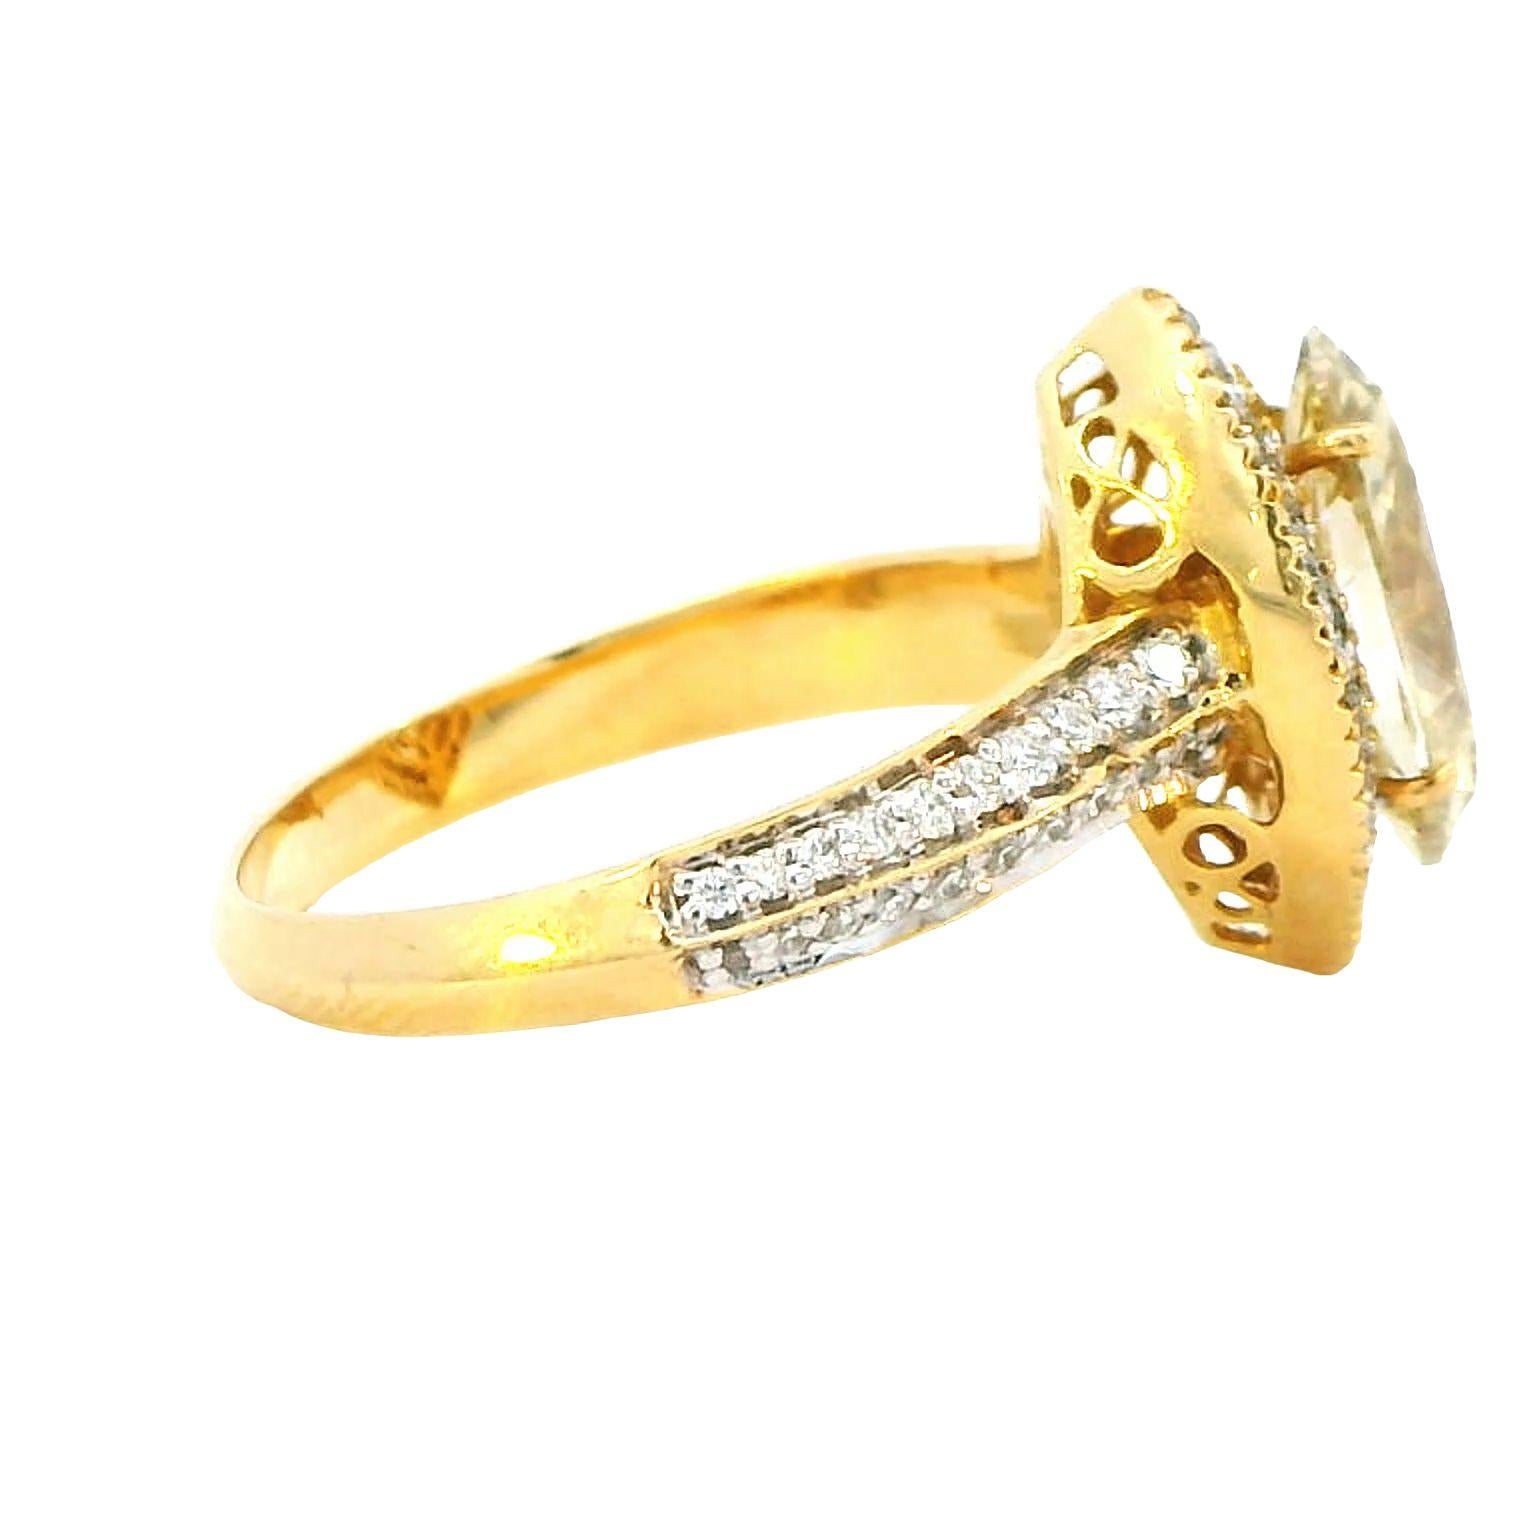 1.51 Carat Yellow Marquise 0.23 Carat Round Cut Diamond Ring 18K Gold In New Condition For Sale In New York, NY